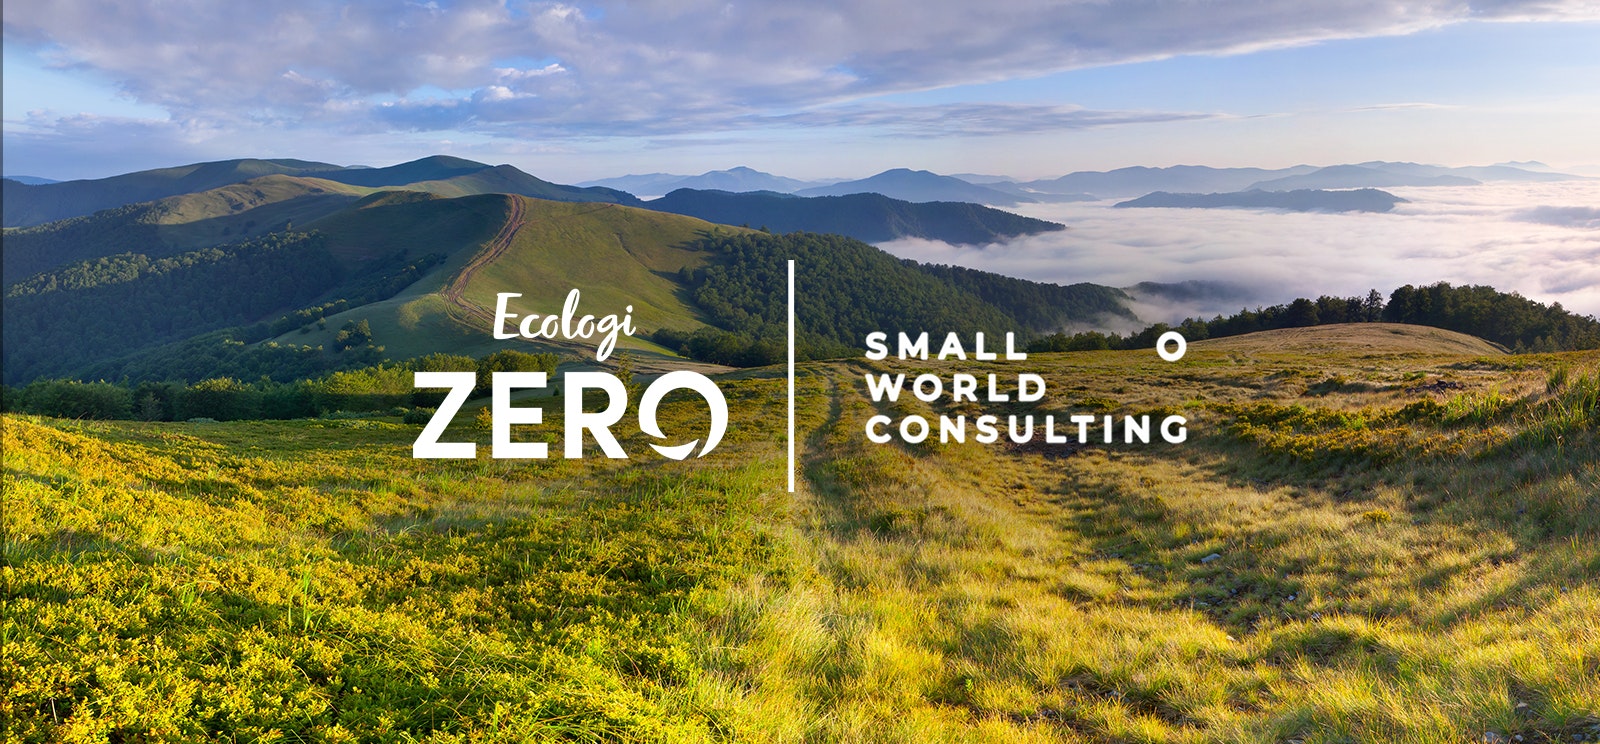 Partnering with Small World Consulting